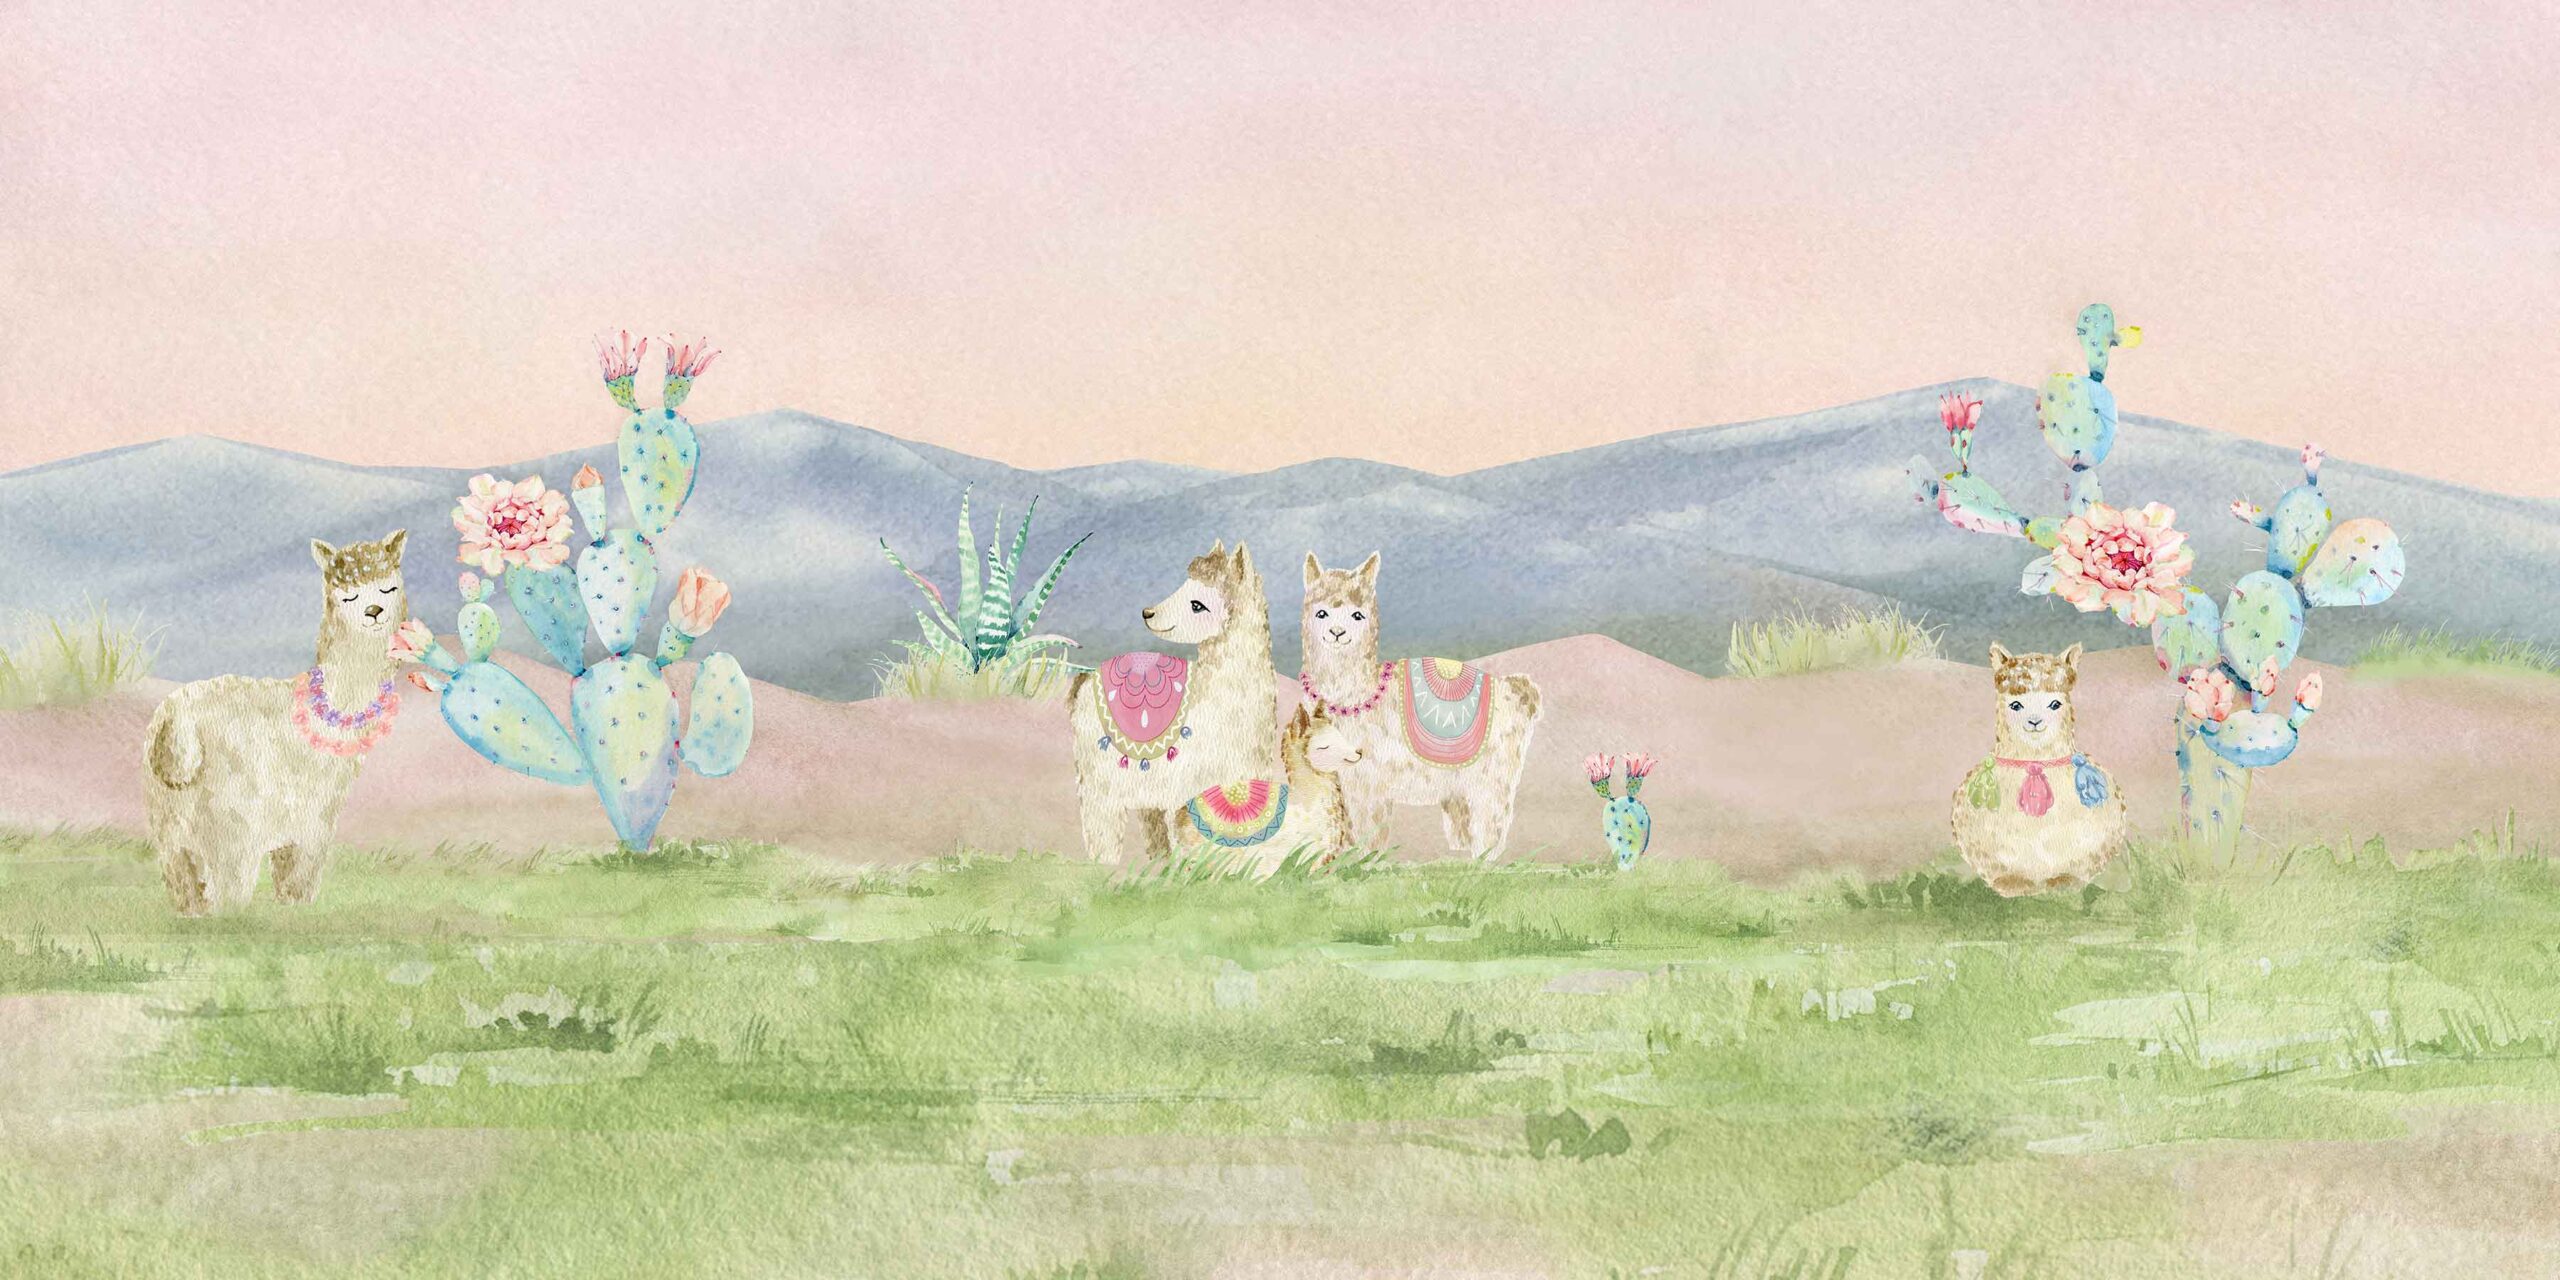 boho style, llamas with flowering cactus, mountains, South American, Andes Mountains, watercolor, children's art, art for kids, kid's art, pastel